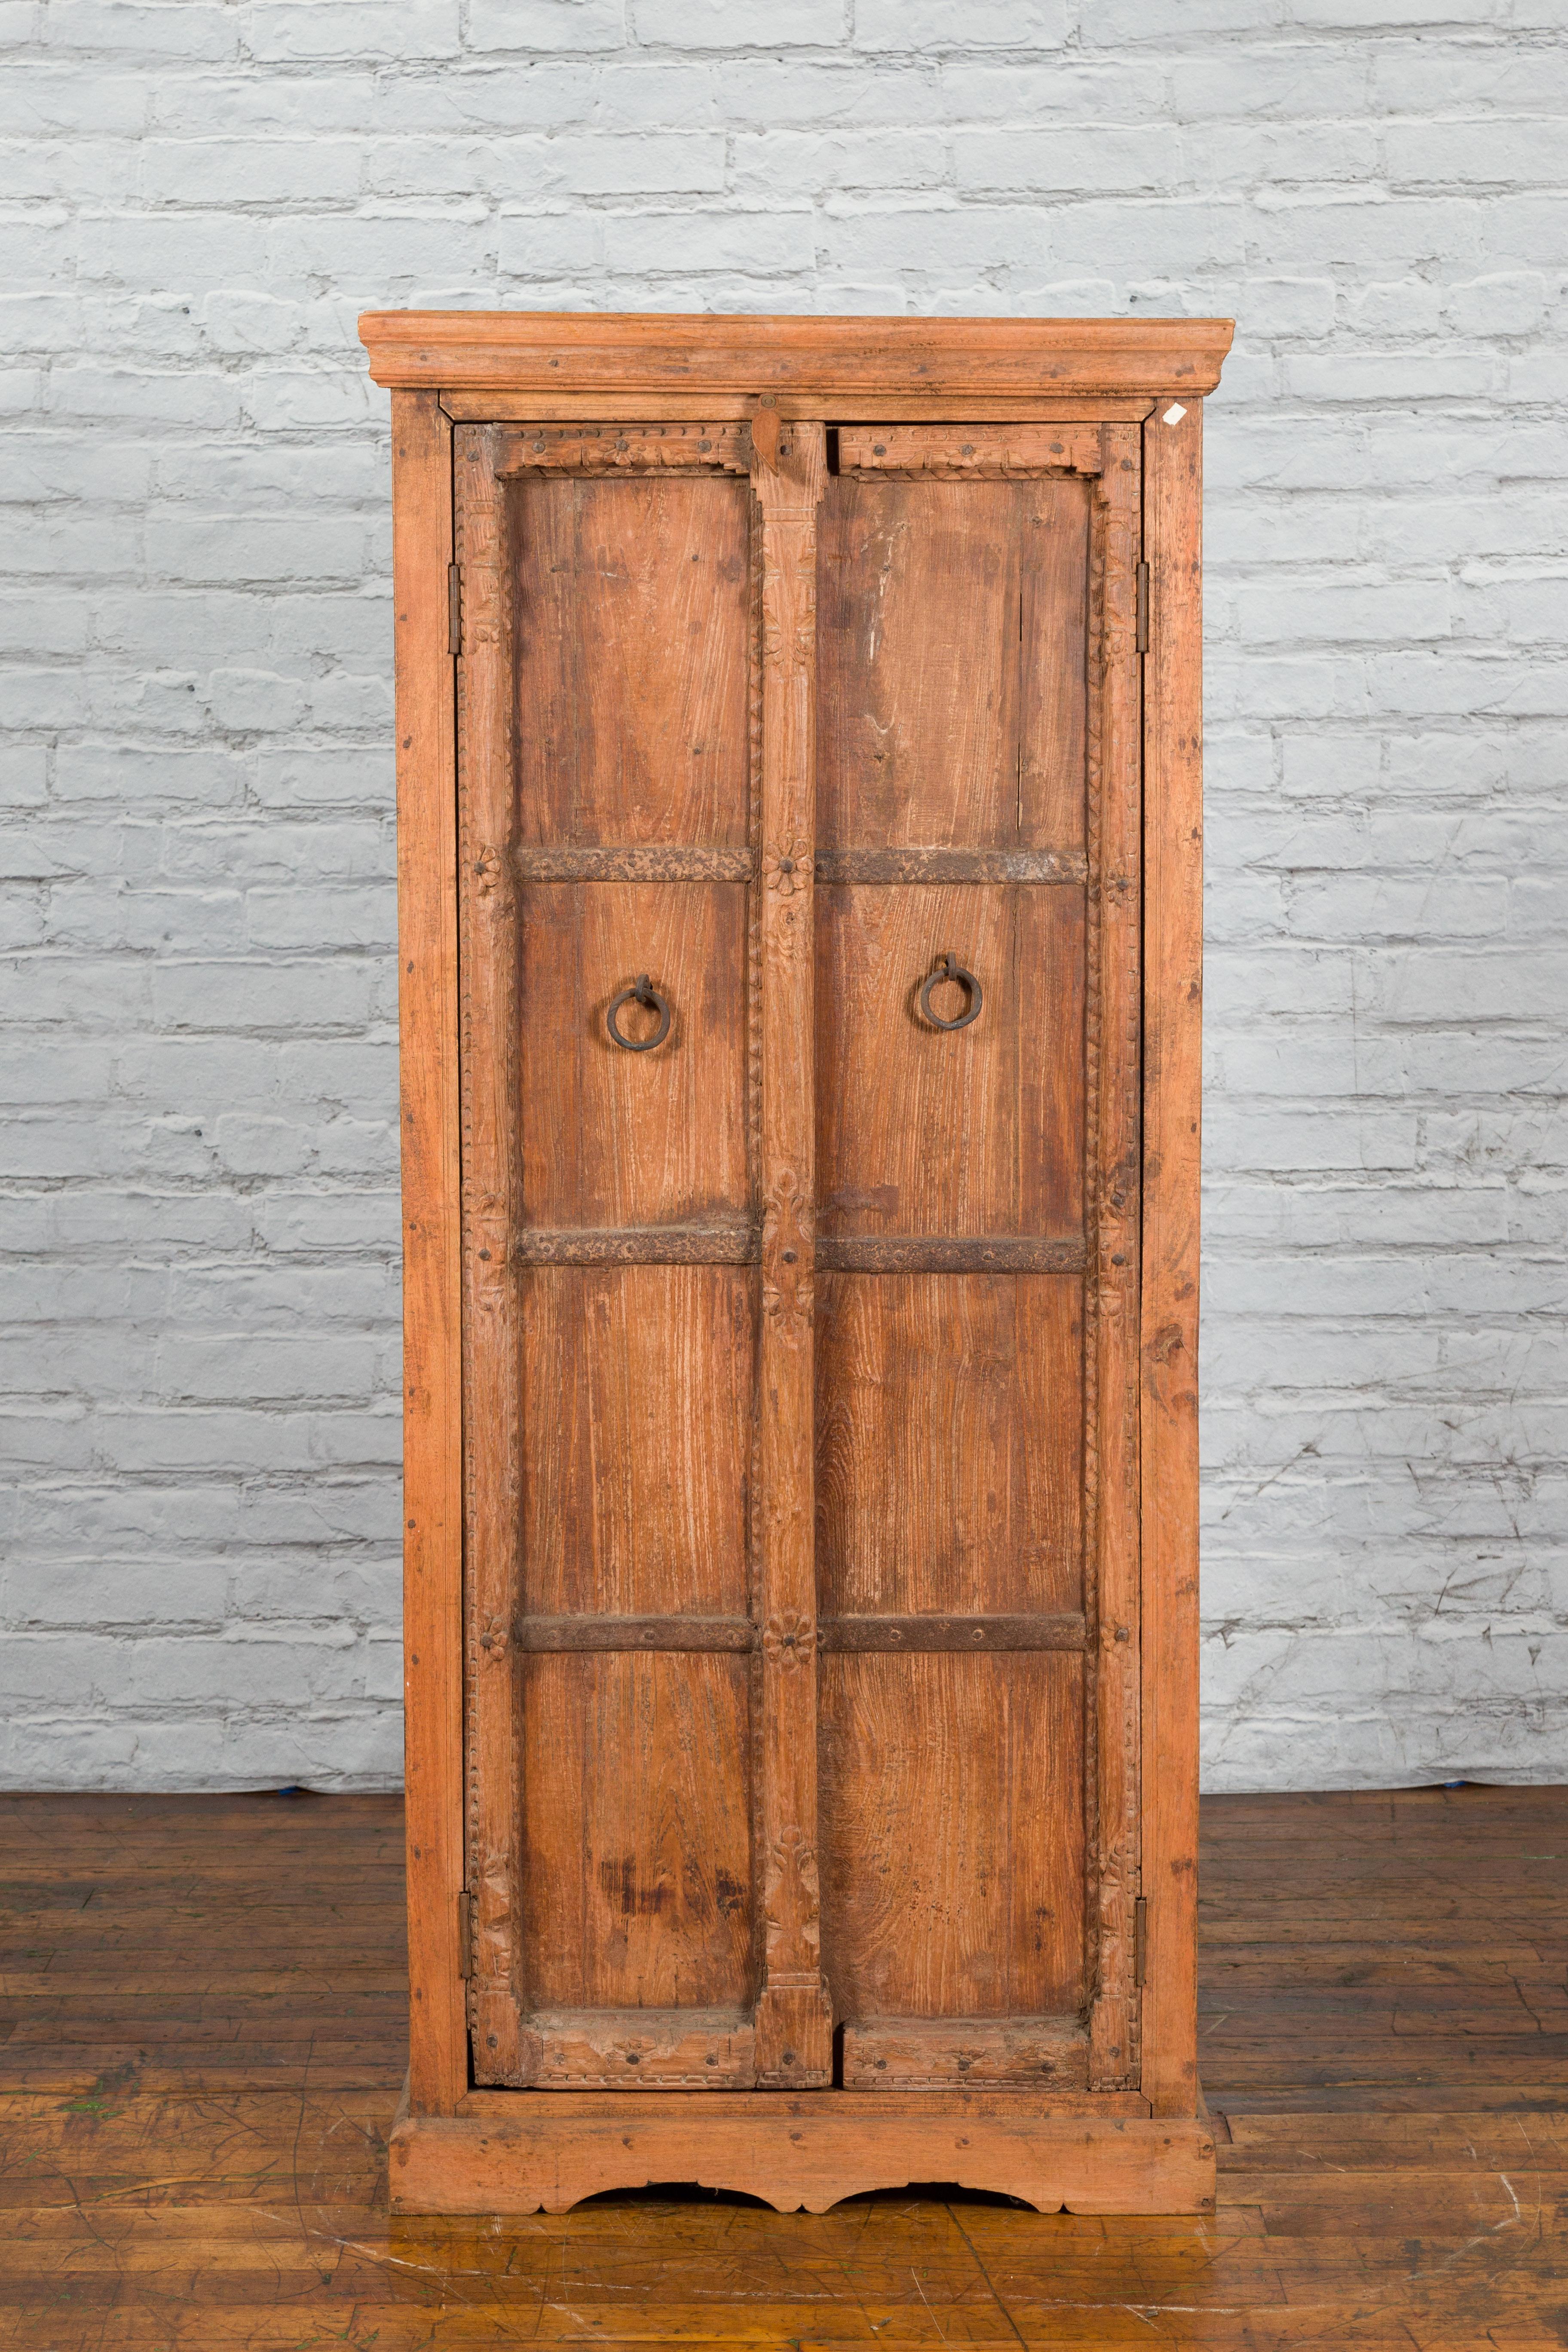 A mid 19th century Indian Gujarat hand-carved wooden cabinet with ring pulls and iron hardware. Created in India during the mid 19th century, this narrow cabinet features a linear silhouette beautifully accented with hand-carved floral motifs and